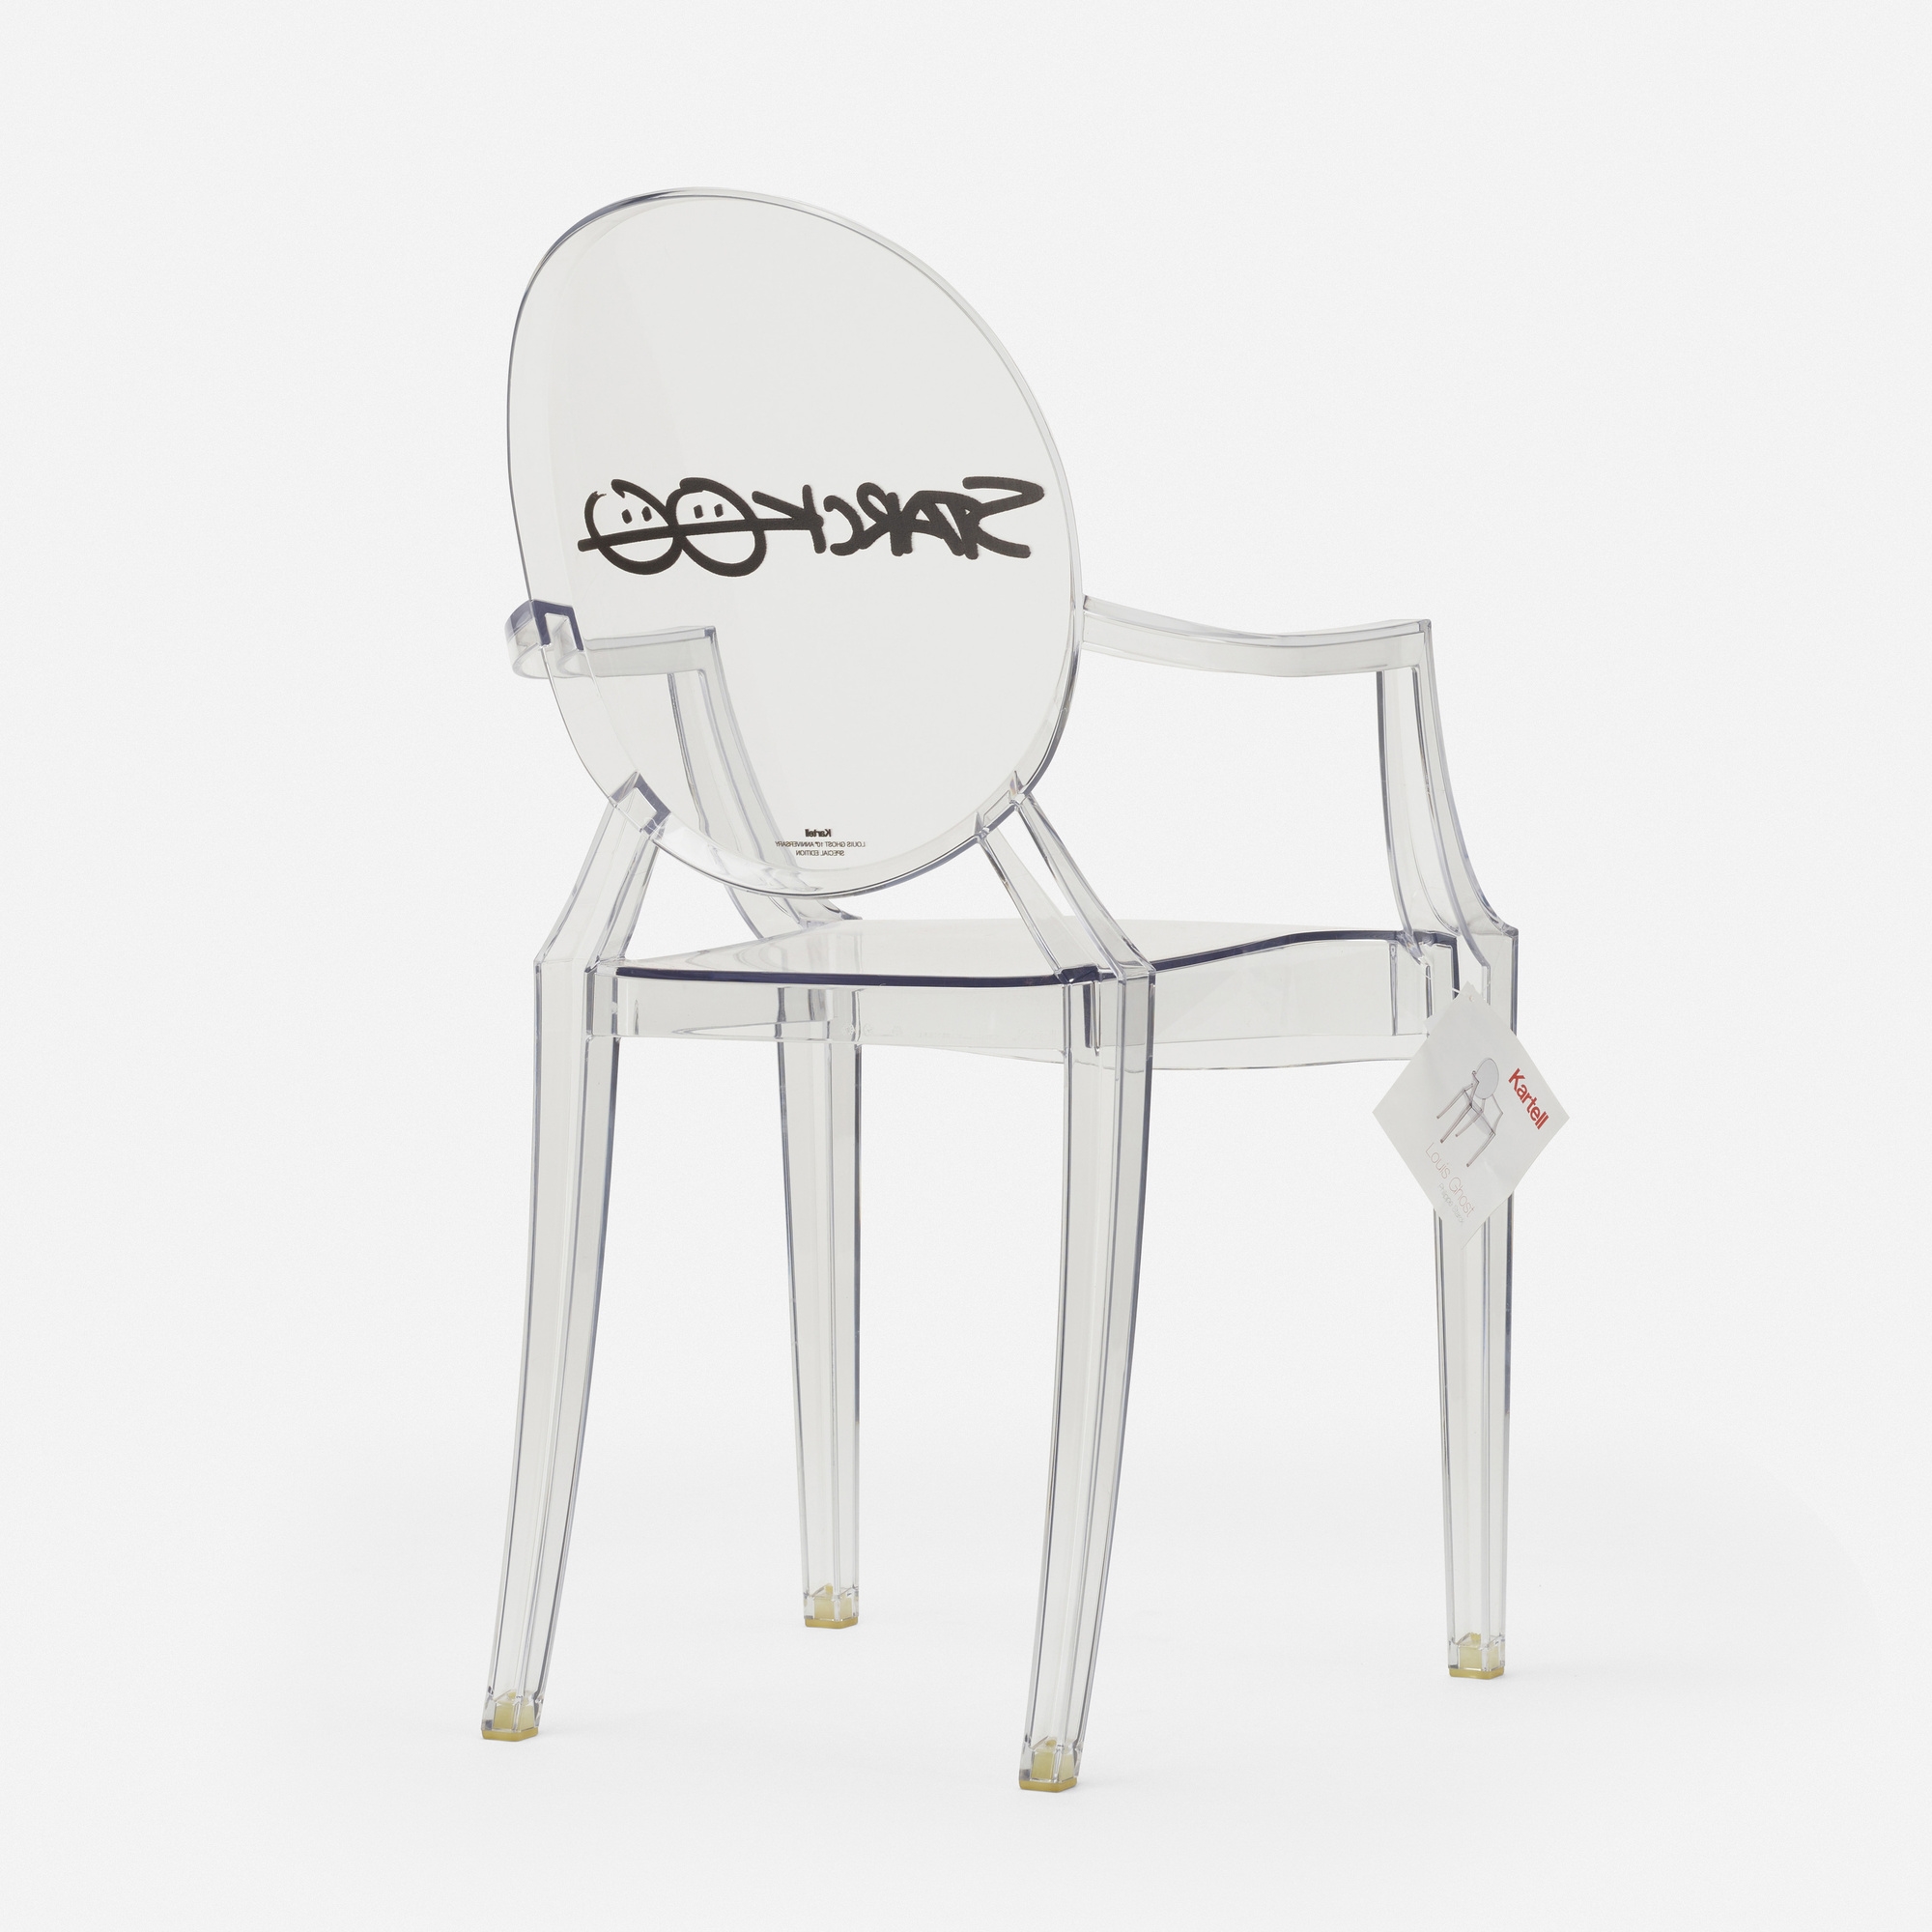 Artwork by Philippe Starck, Limited Edition Kartell Louis Ghost chair, Made of molded acrylic